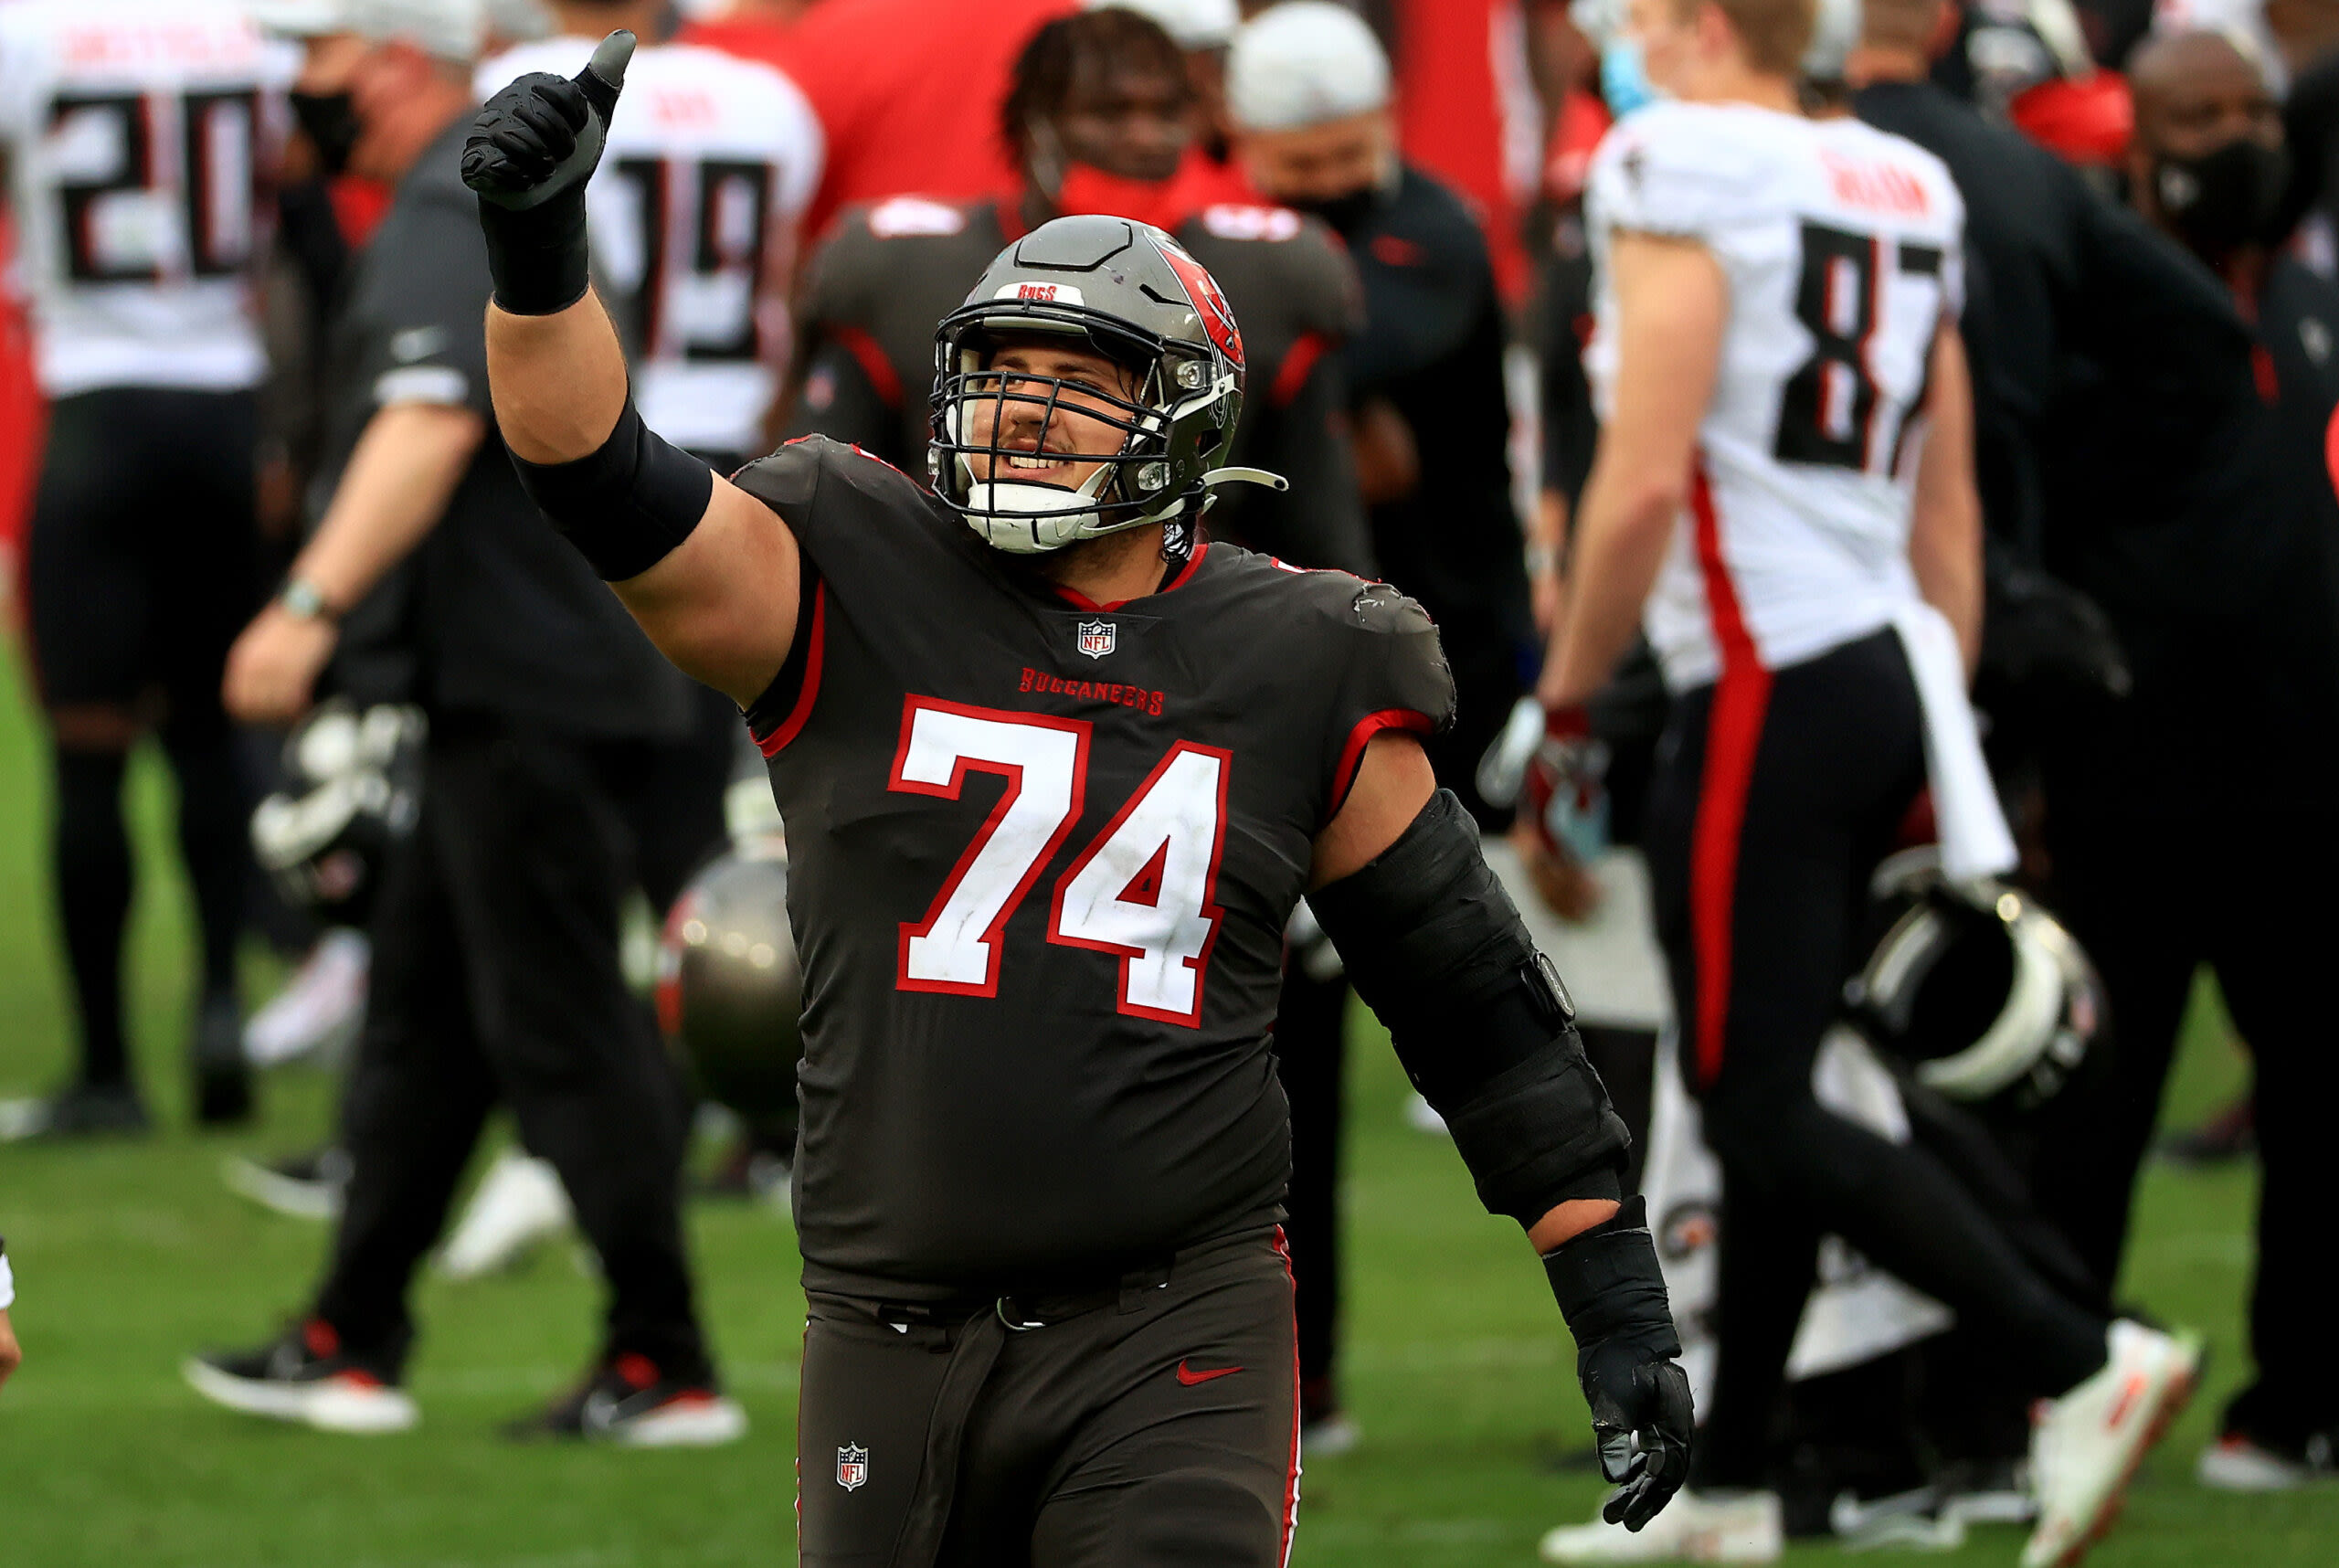 What’s the best offensive lineman number in Bucs history?